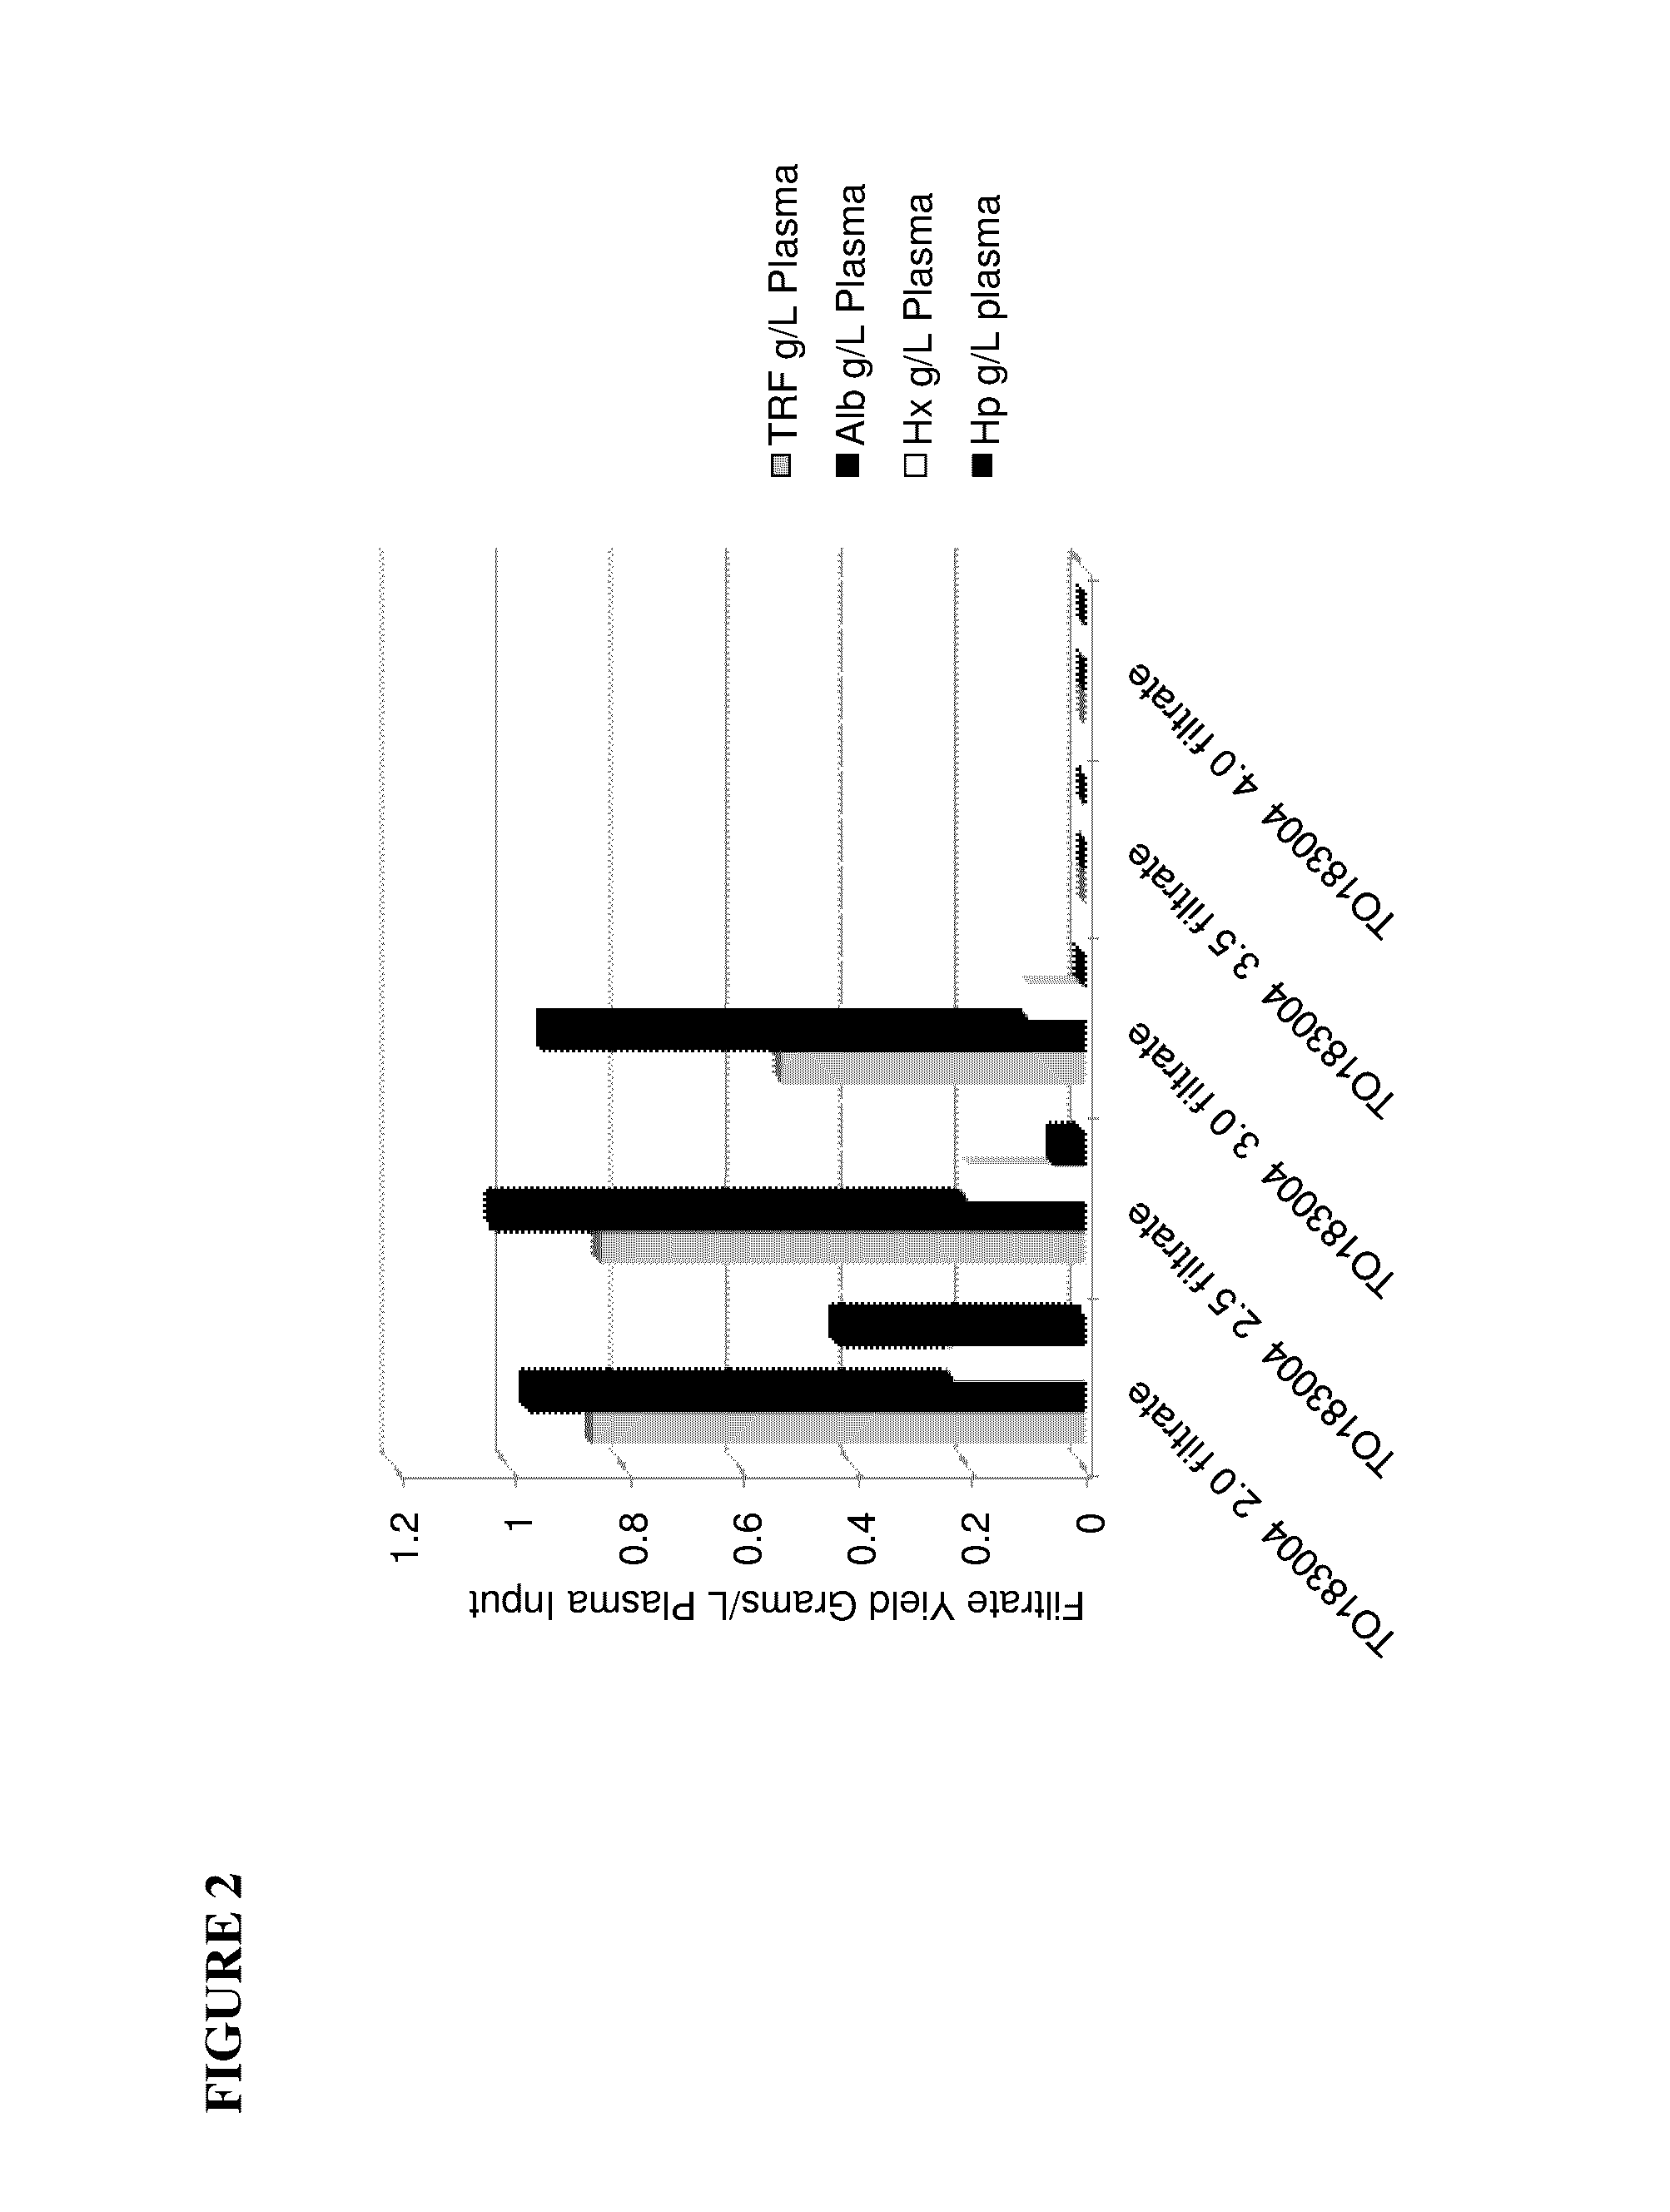 Method of purifying proteins